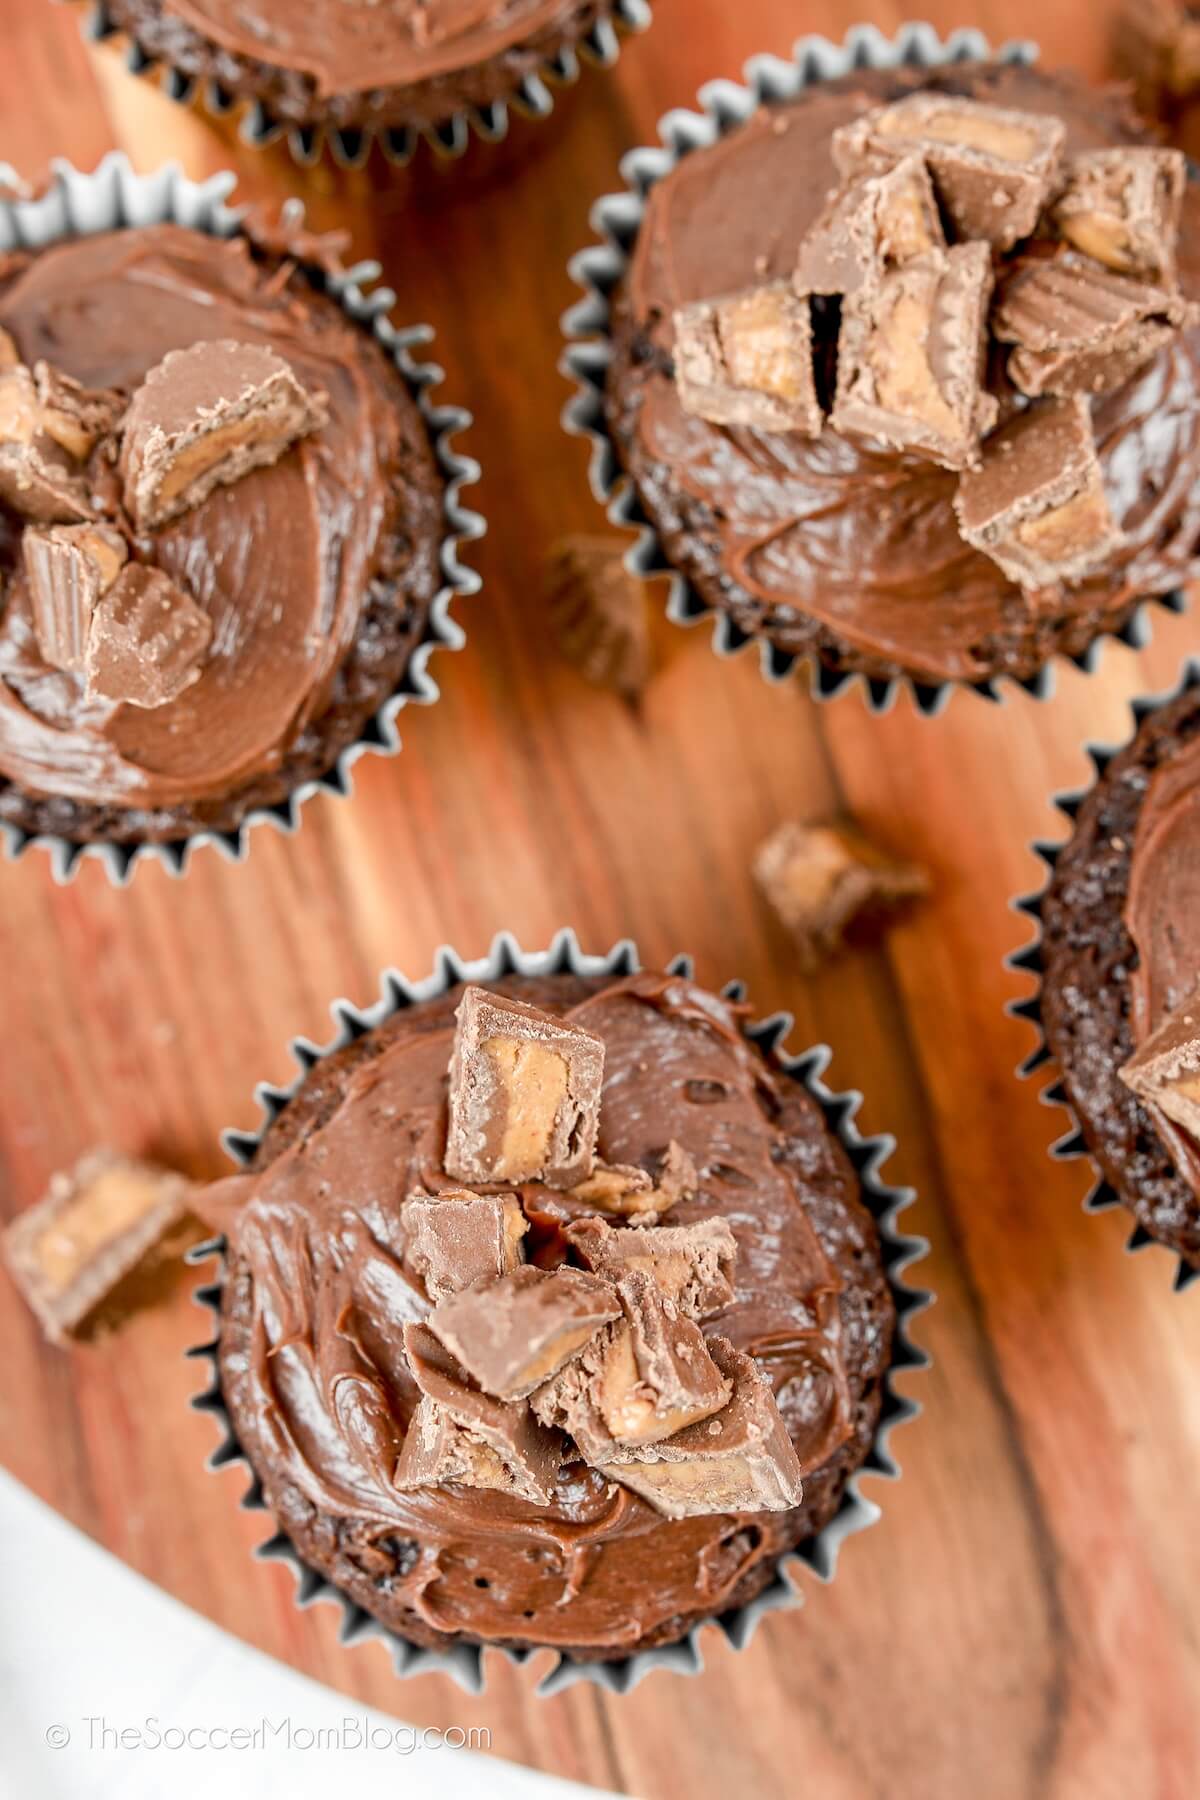 bird's eye view of chocolate cupcakes with peanut butter cup pieces on top